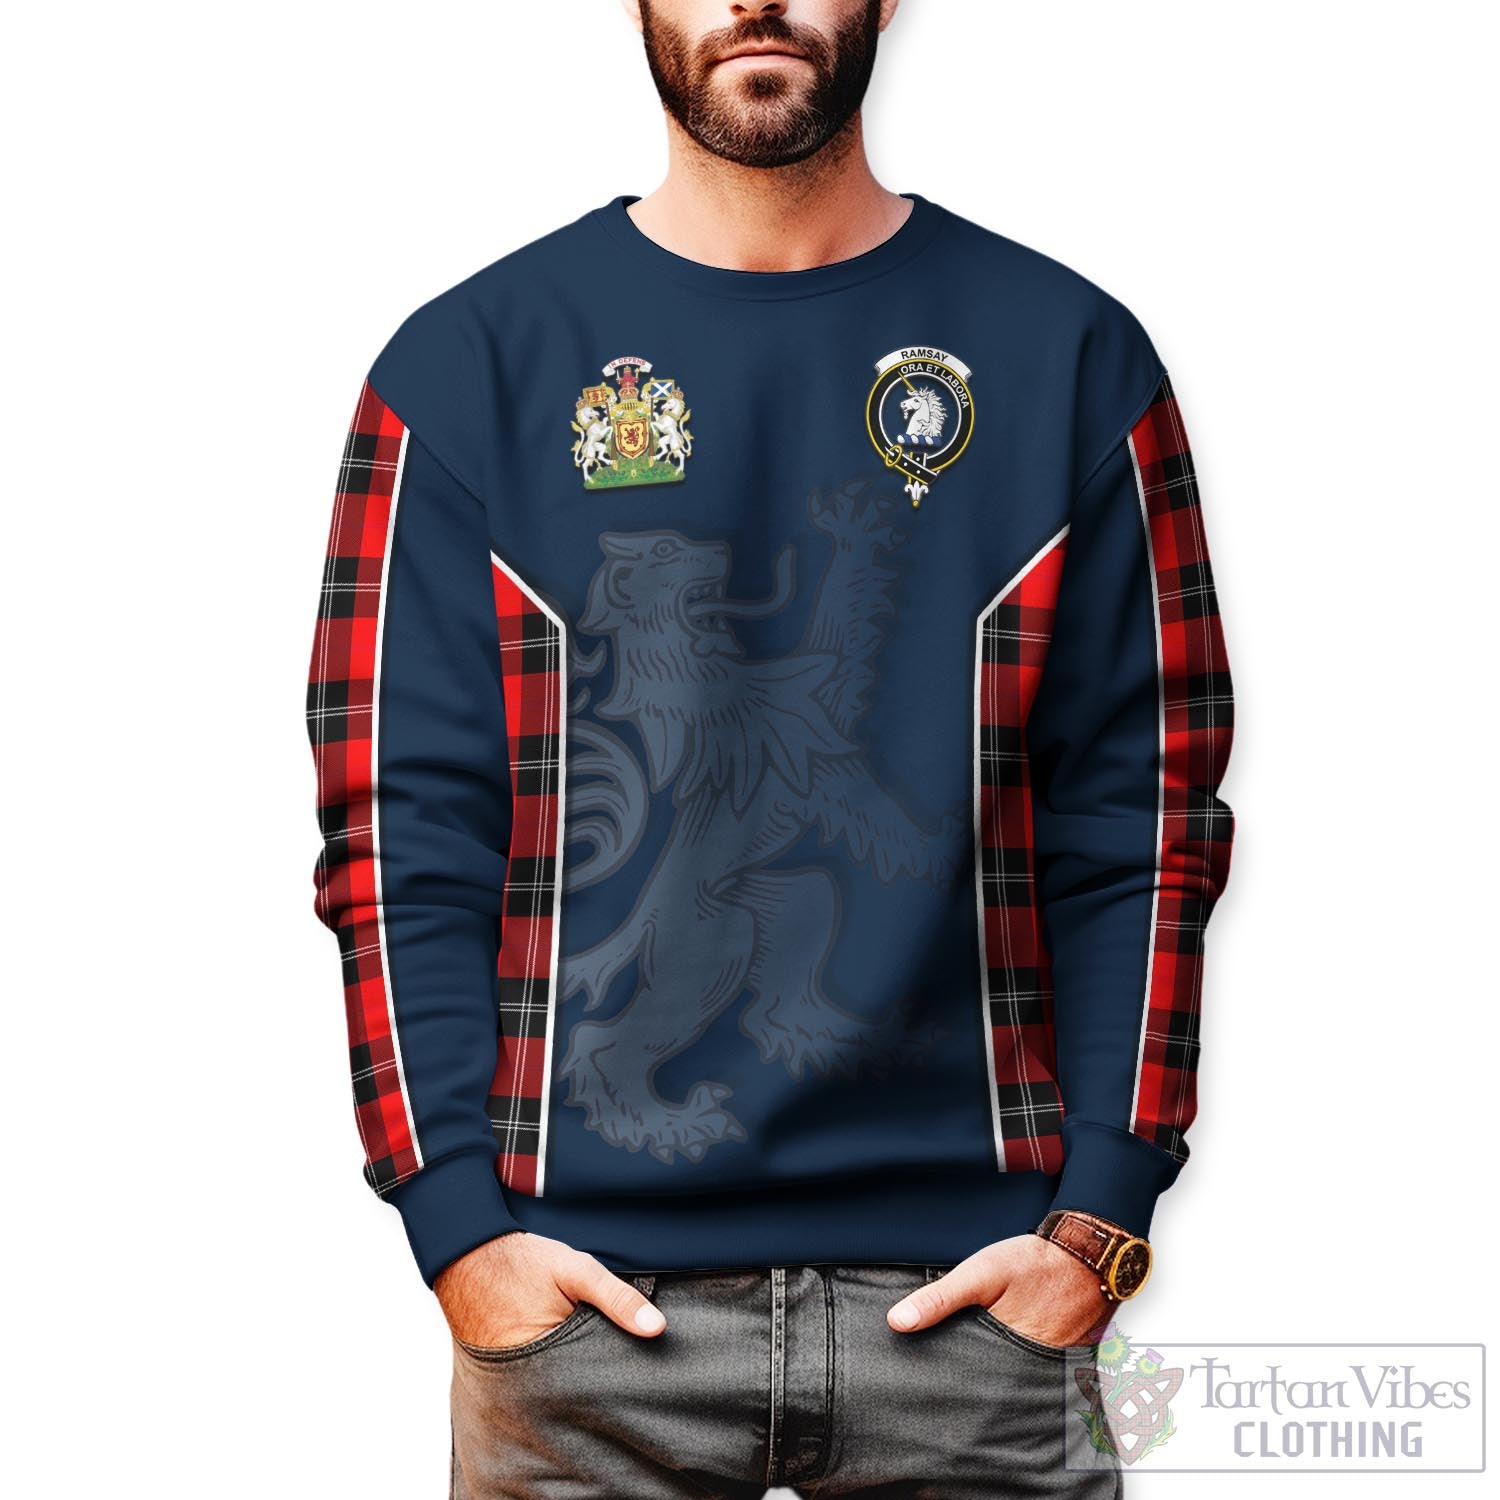 Tartan Vibes Clothing Ramsay Modern Tartan Sweater with Family Crest and Lion Rampant Vibes Sport Style